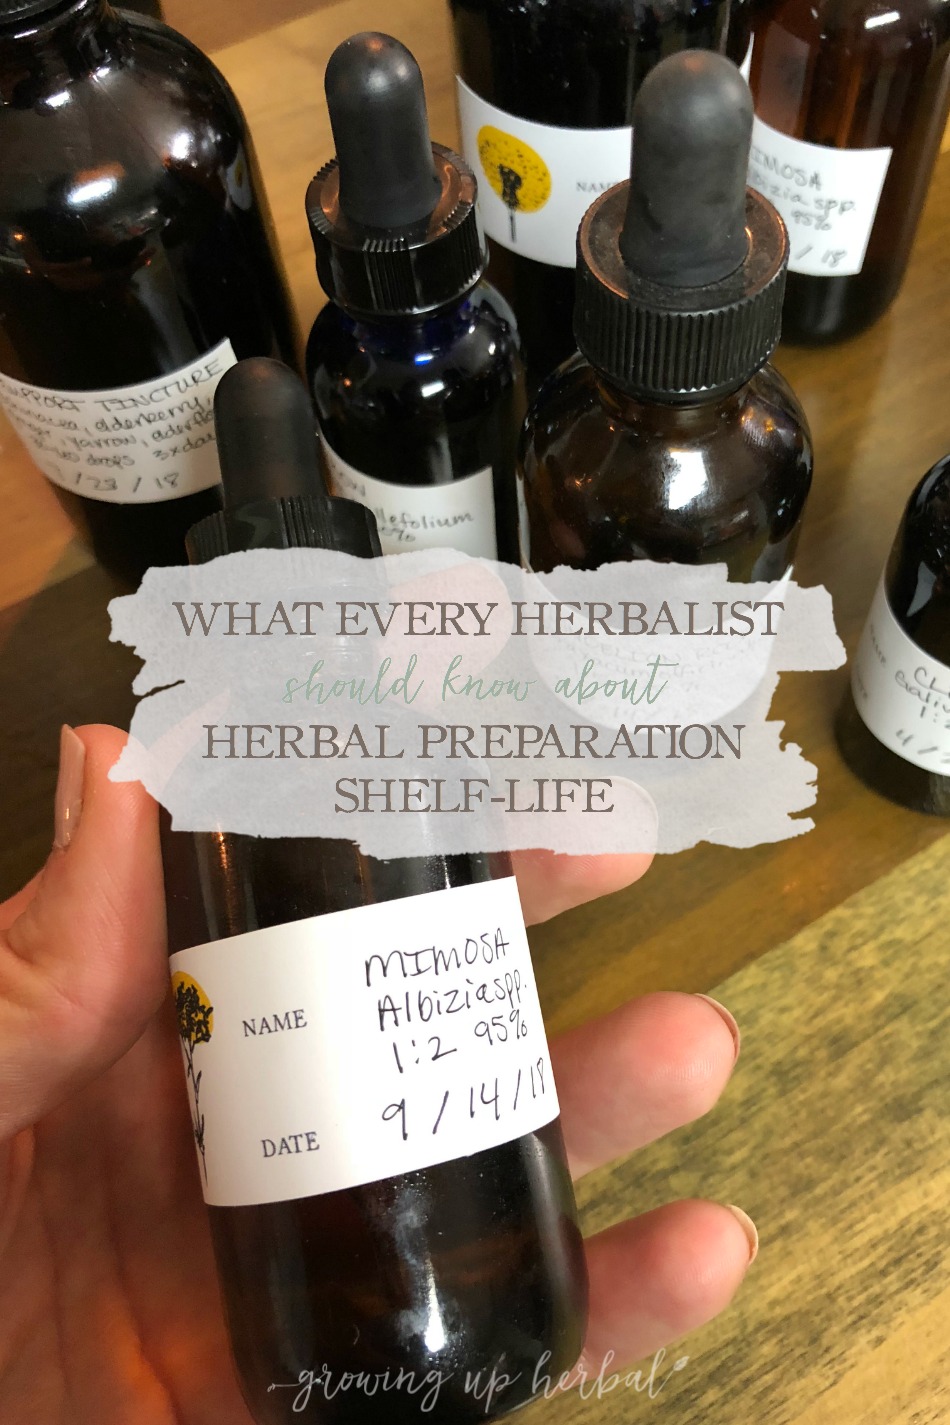 What Every Herbalist Should Know About Herbal Preparation Shelf-Life | Growing Up Herbal | Wondering if that salve, tincture, hydrosol, or other herbal preparation is still good? Here’s what you need to know about herbal preparation shelf-life. Free printable included!!